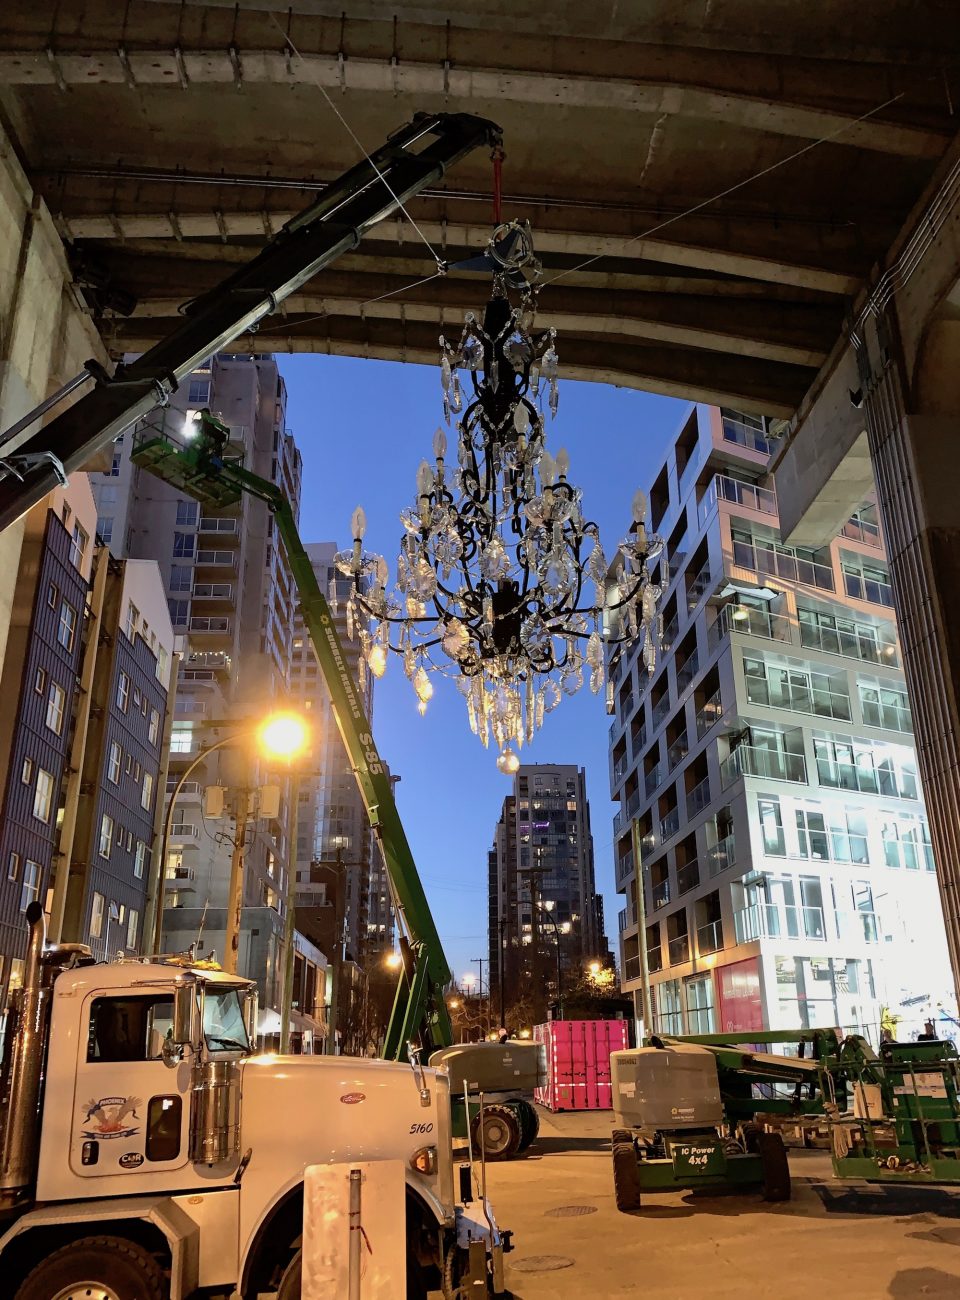 Vancouver House chandelier installation